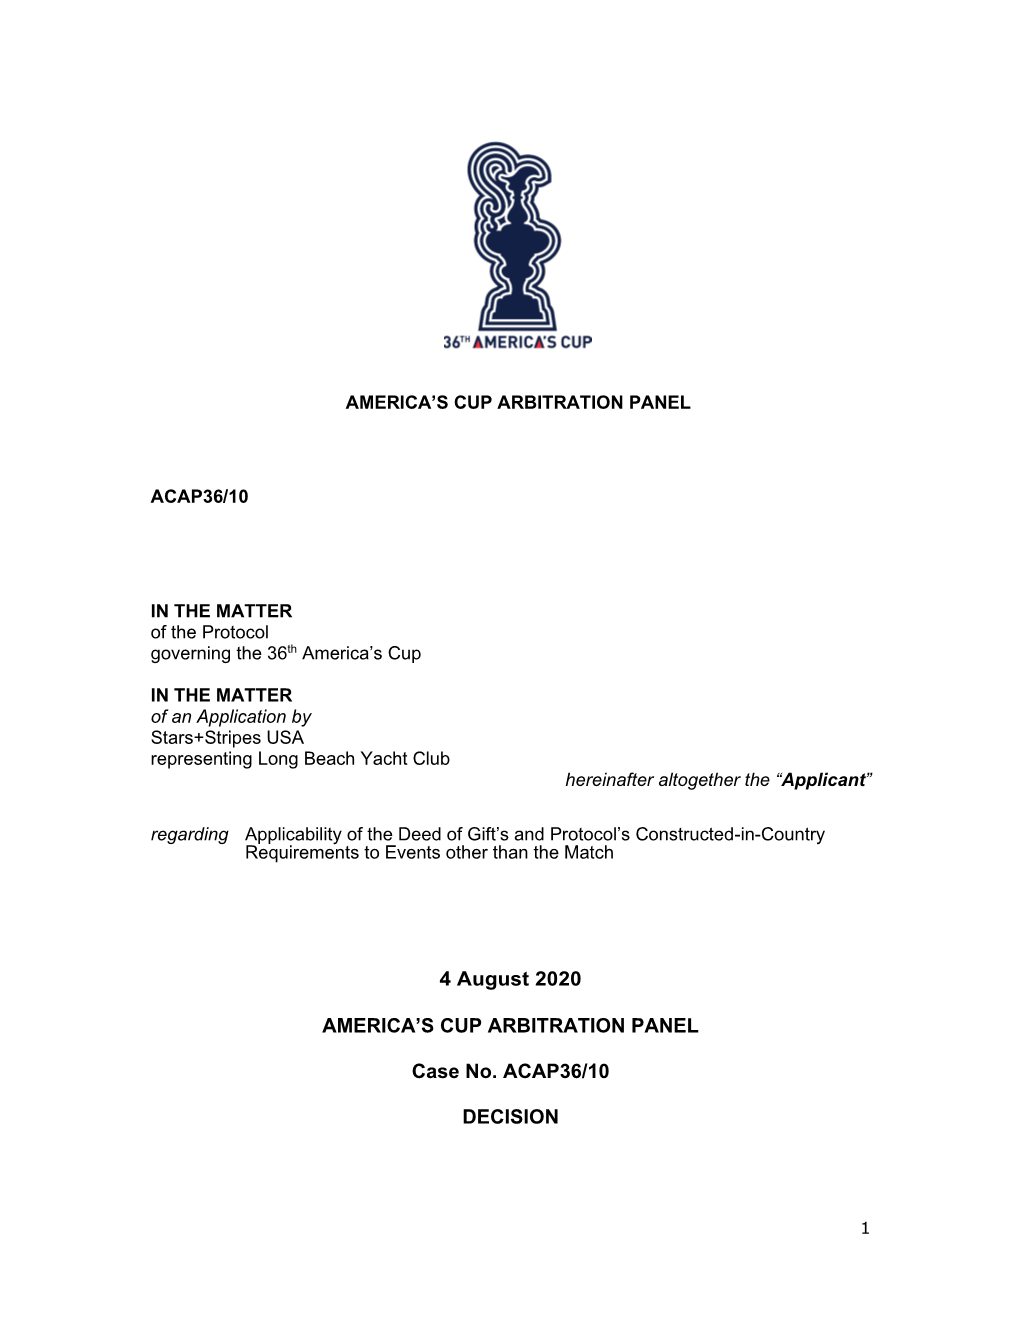 4 August 2020 AMERICA's CUP ARBITRATION PANEL Case No